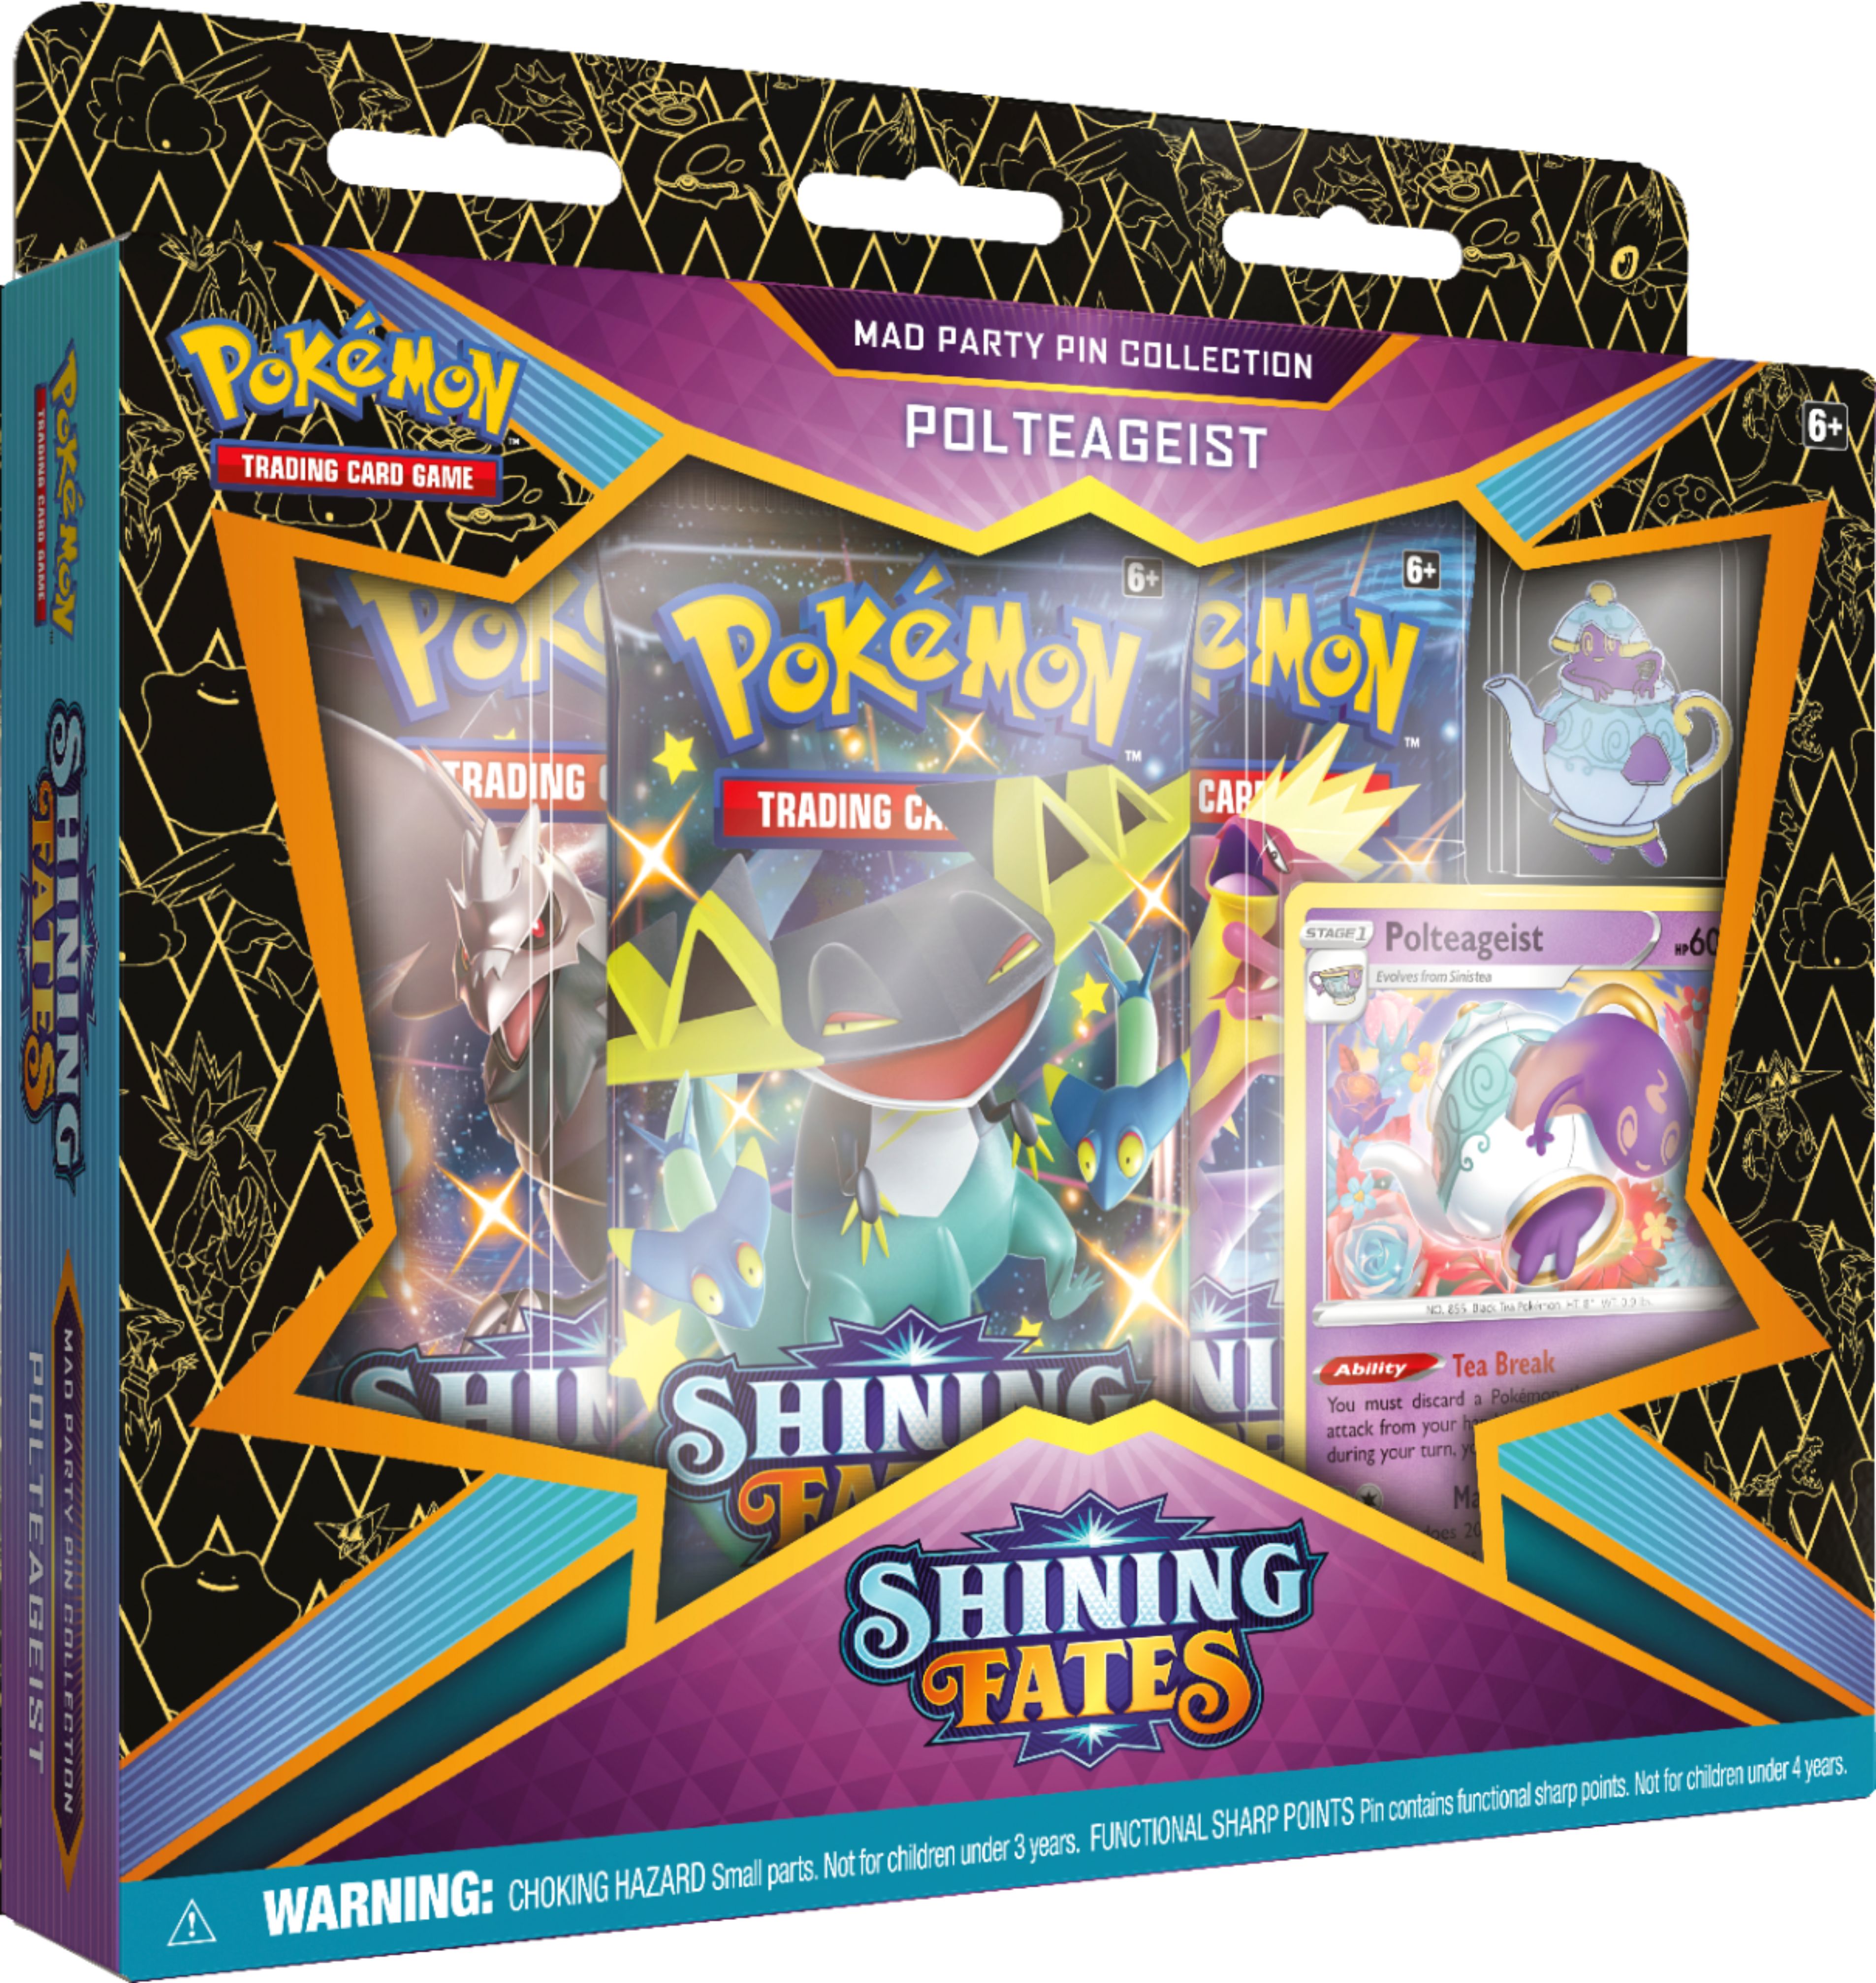 Pokémon TCG for sale online Galarian Mr. Rime Shining Fates Mad Party Pin Collections Box